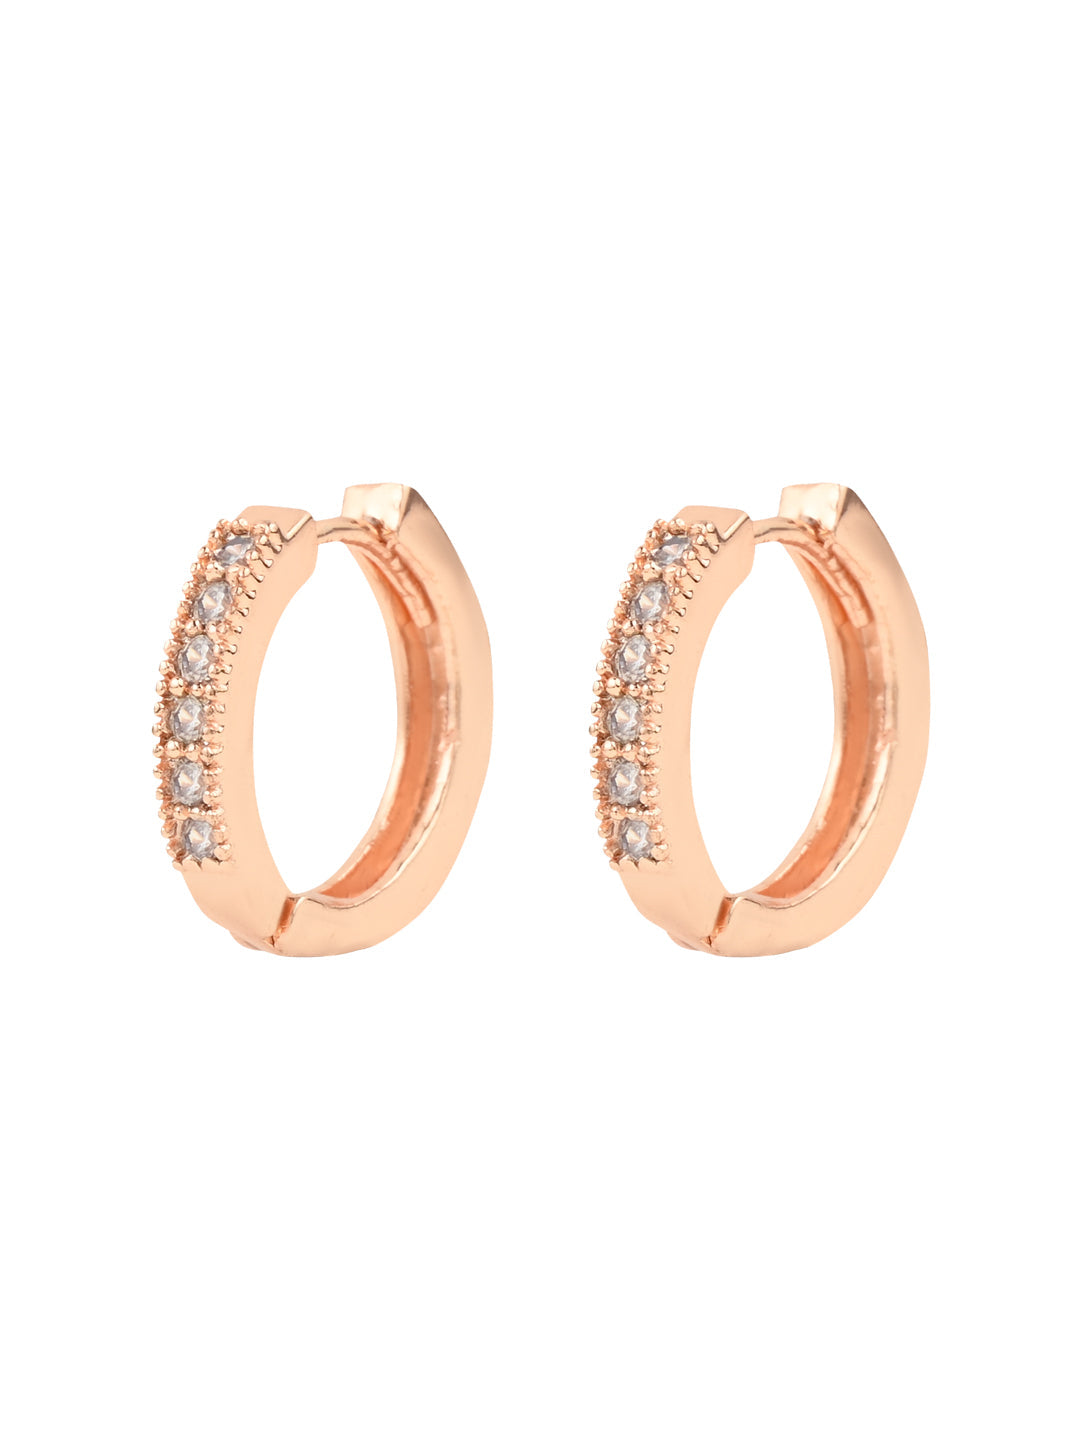 Women's I Jewels Valentine'S Special Rose Gold-Plated Contemporary Ad Studs Earrings (E2978) - I Jewels